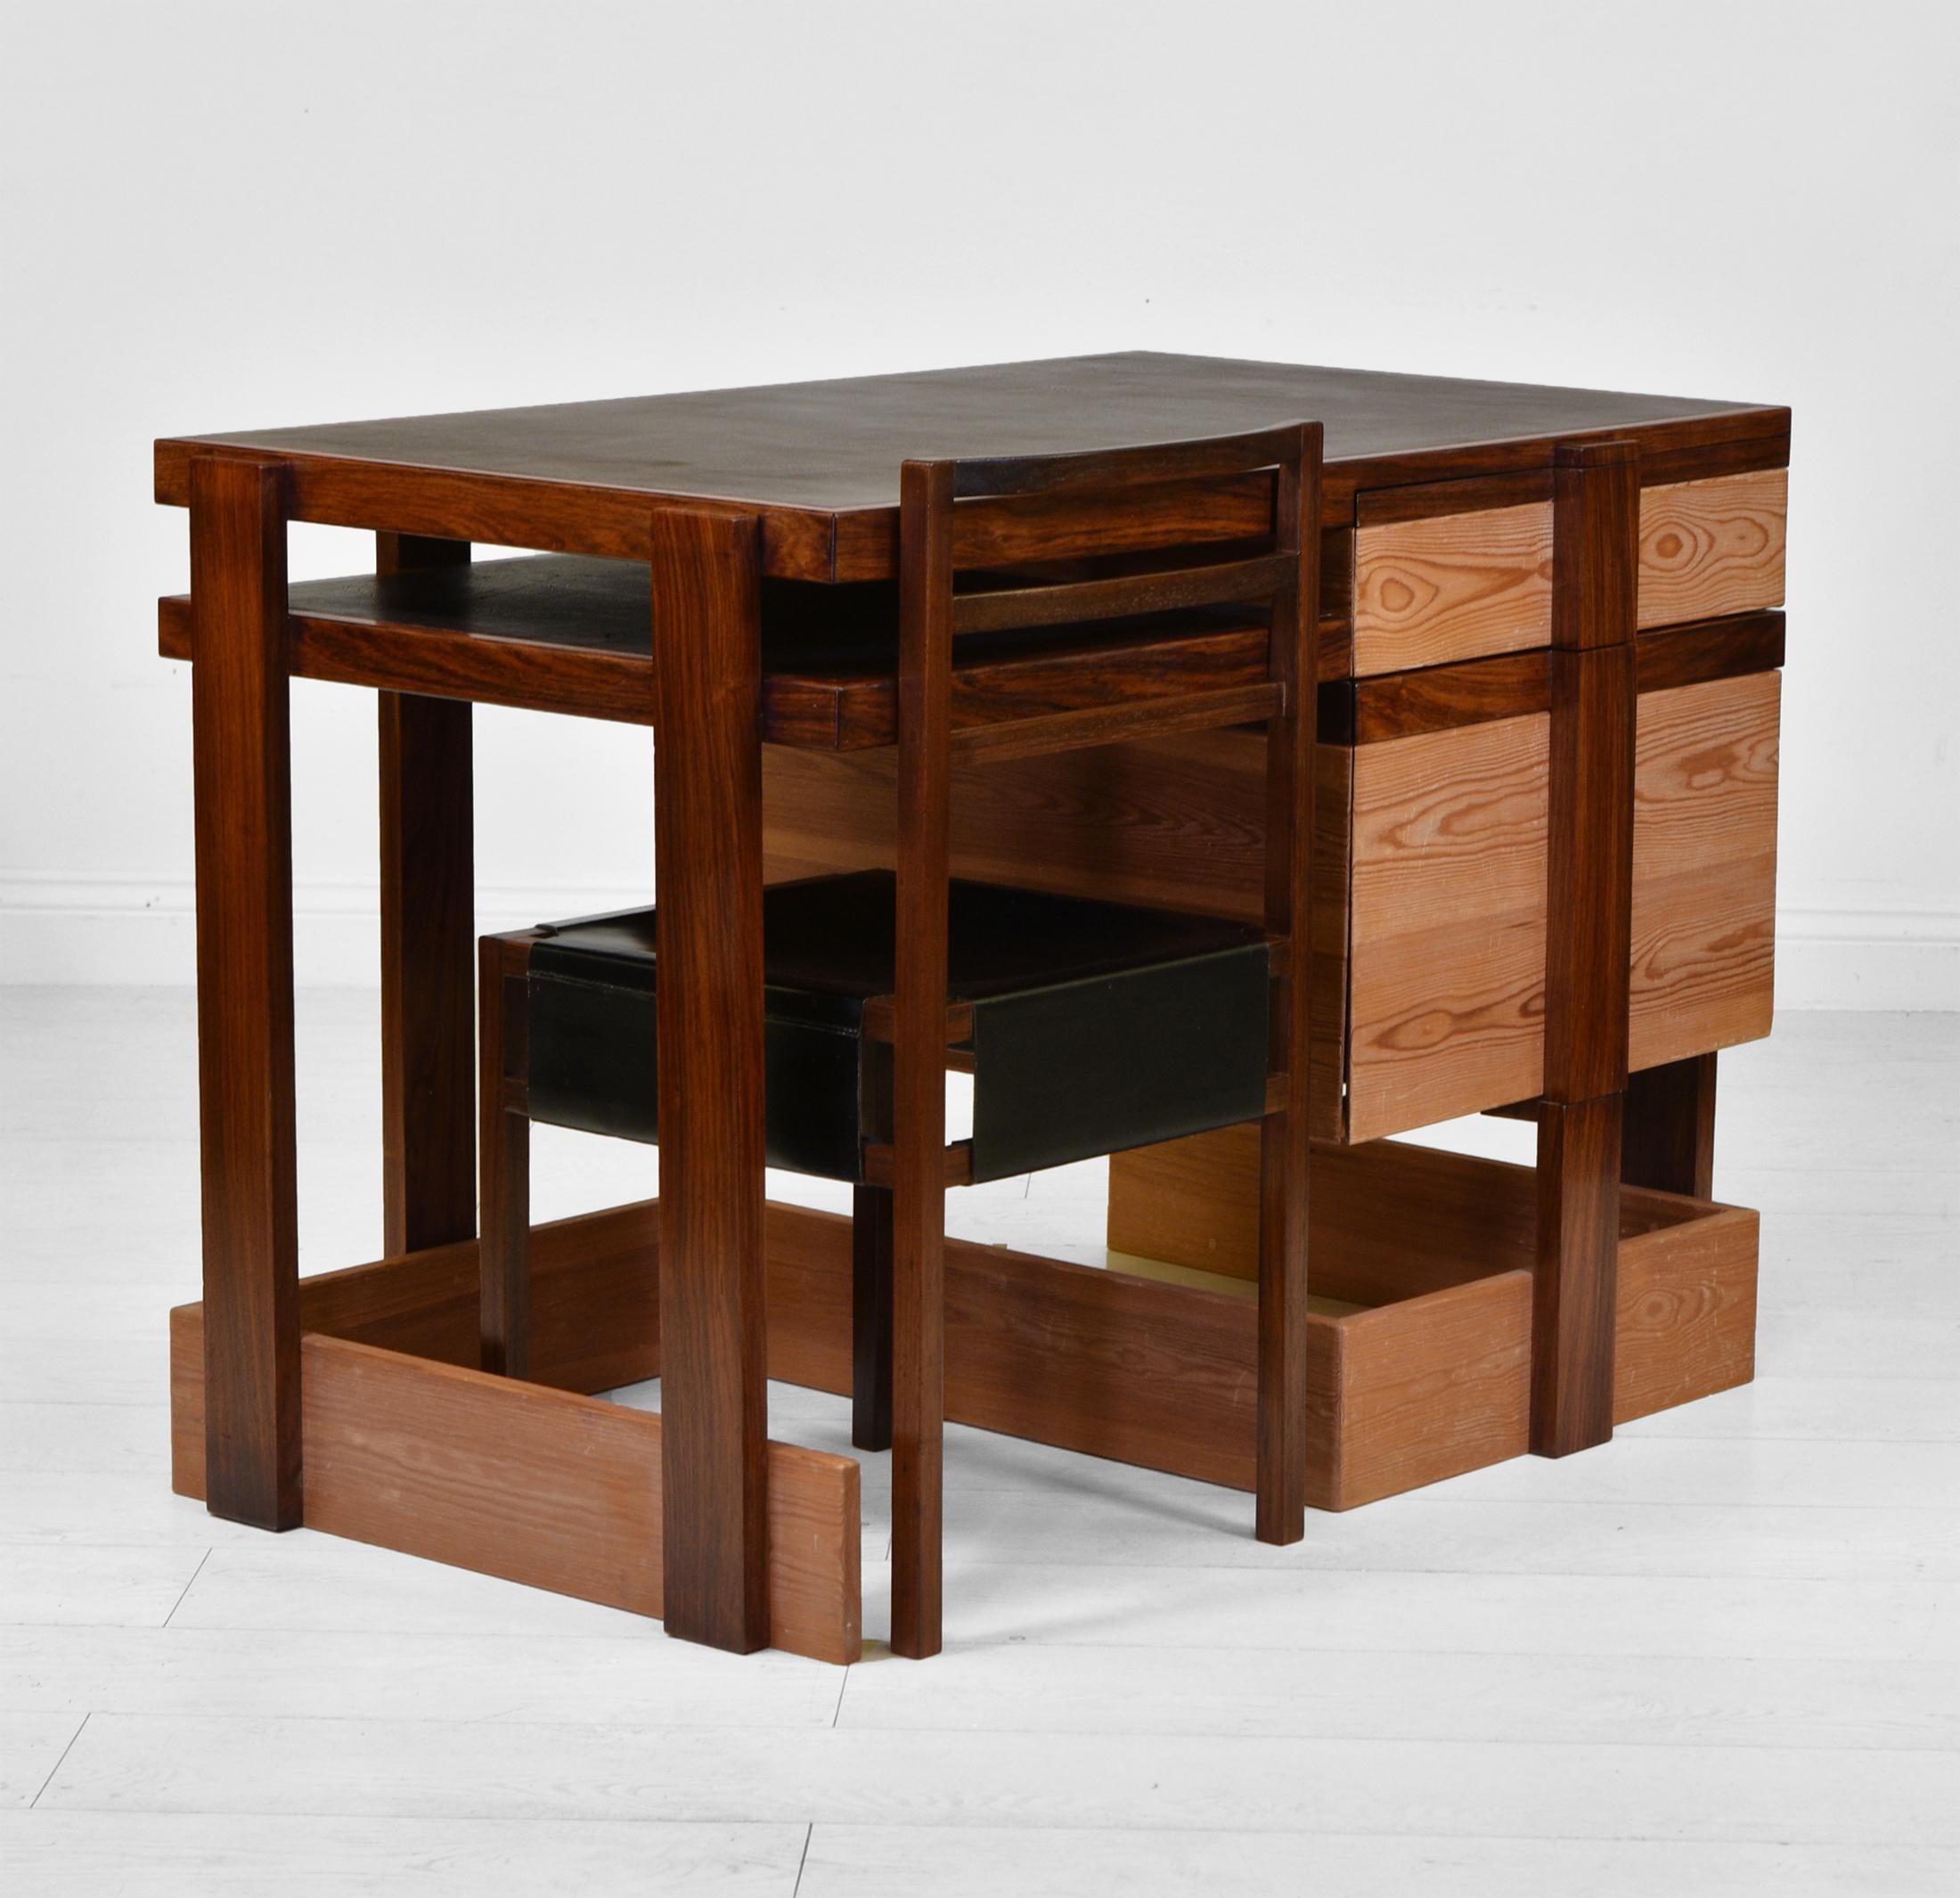 English Modernist Bombay Rosewood & Scrub Pine Desk + Chair by George Sneed Circa 1970s For Sale